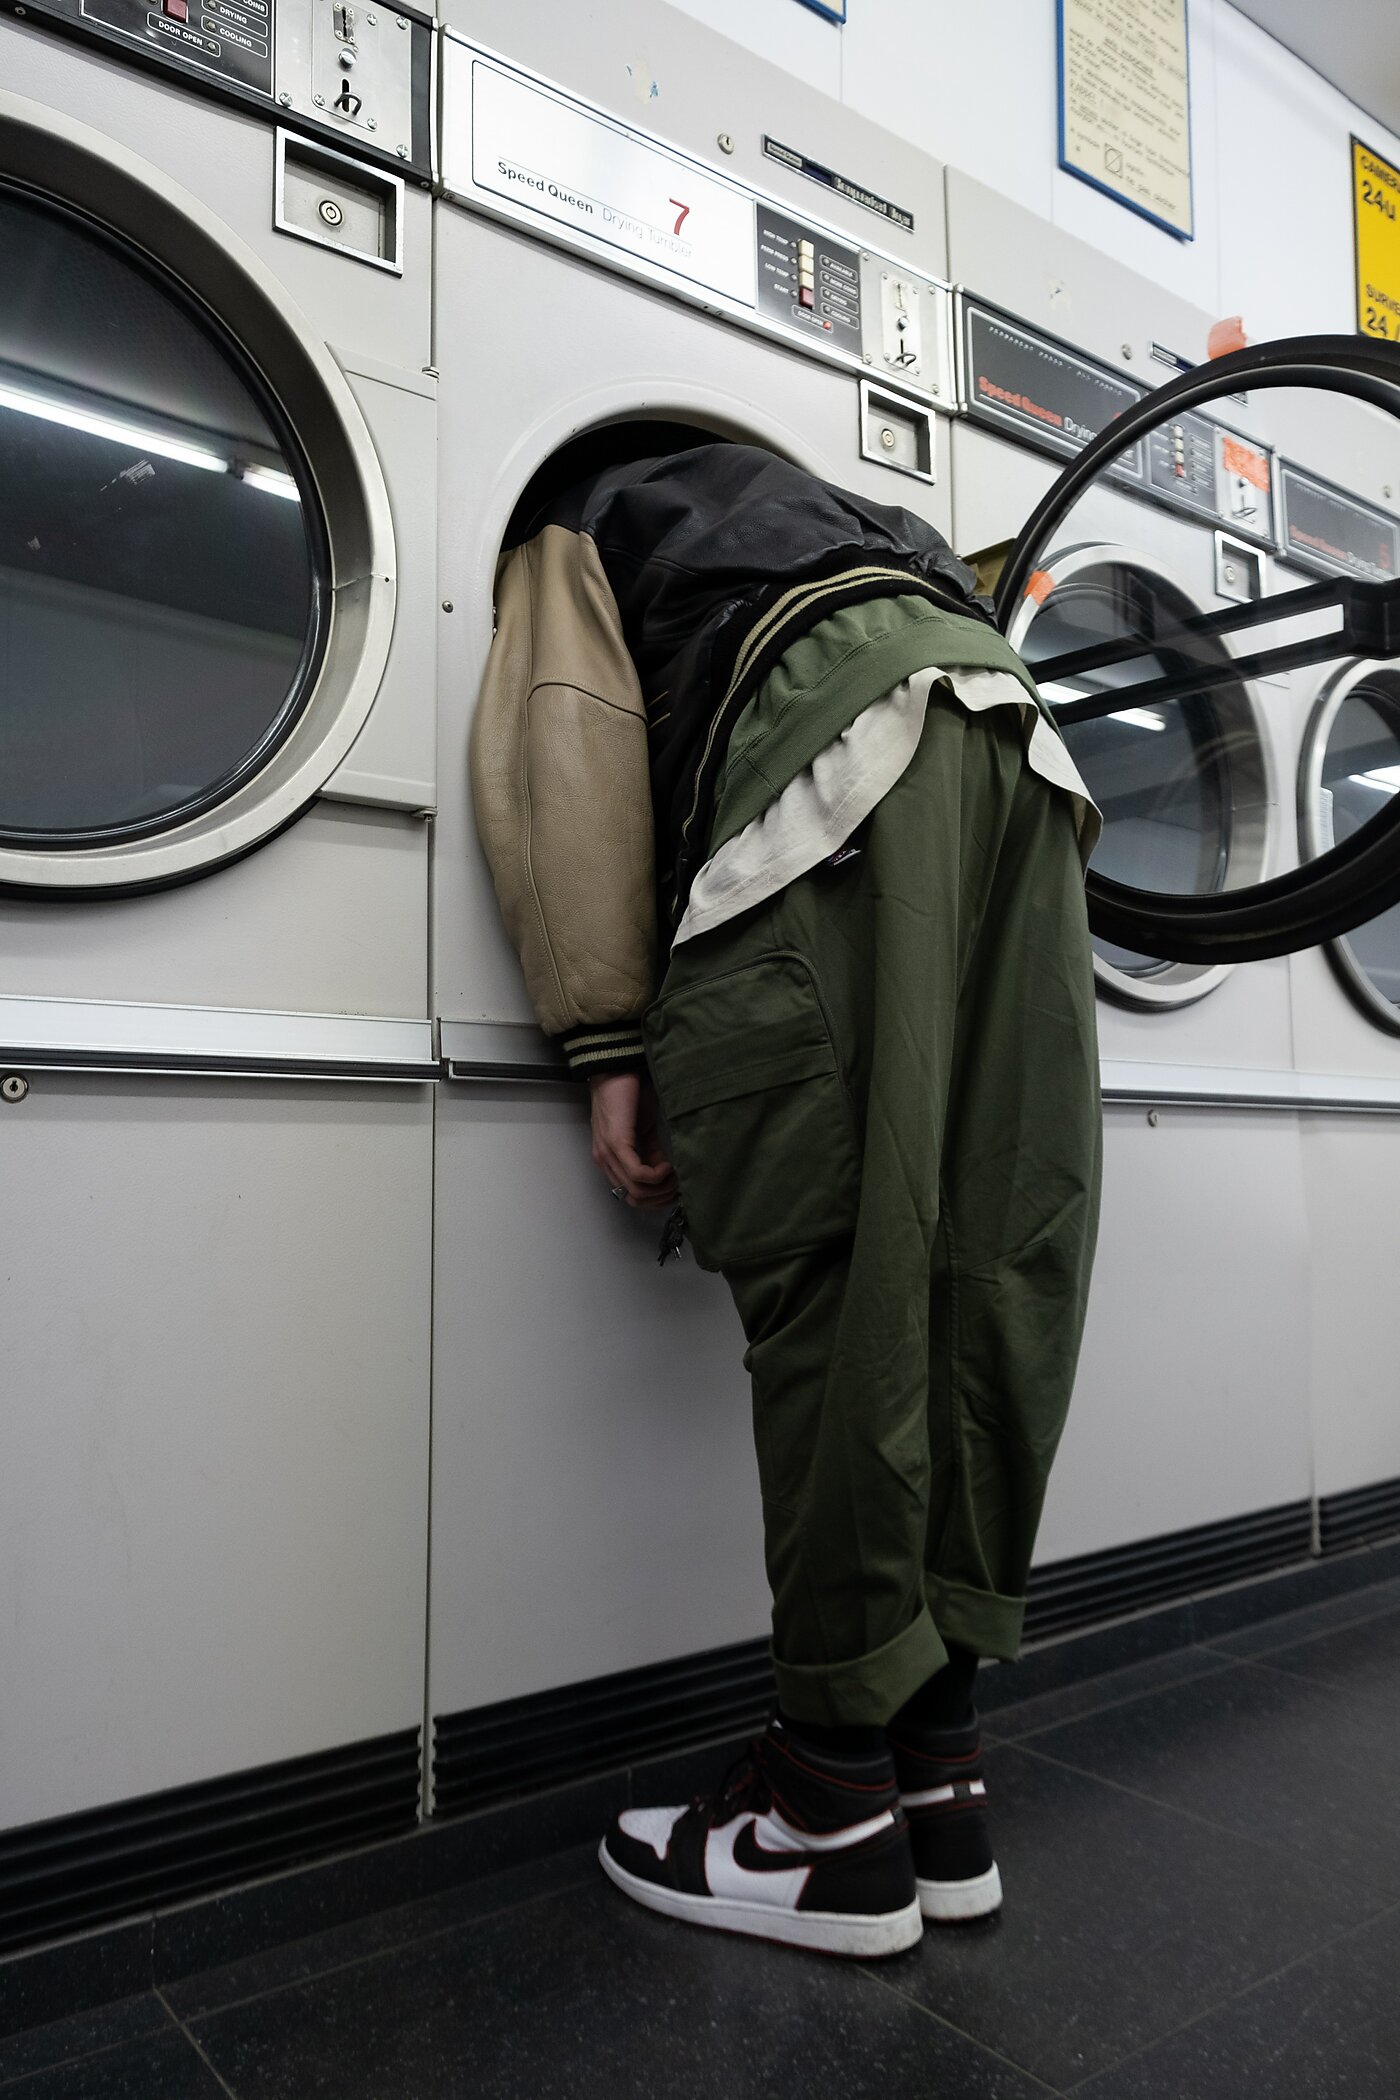 Male figure in jogging wear with their head stuck in a drum of a laundromat machine, arms hanging loose by his side